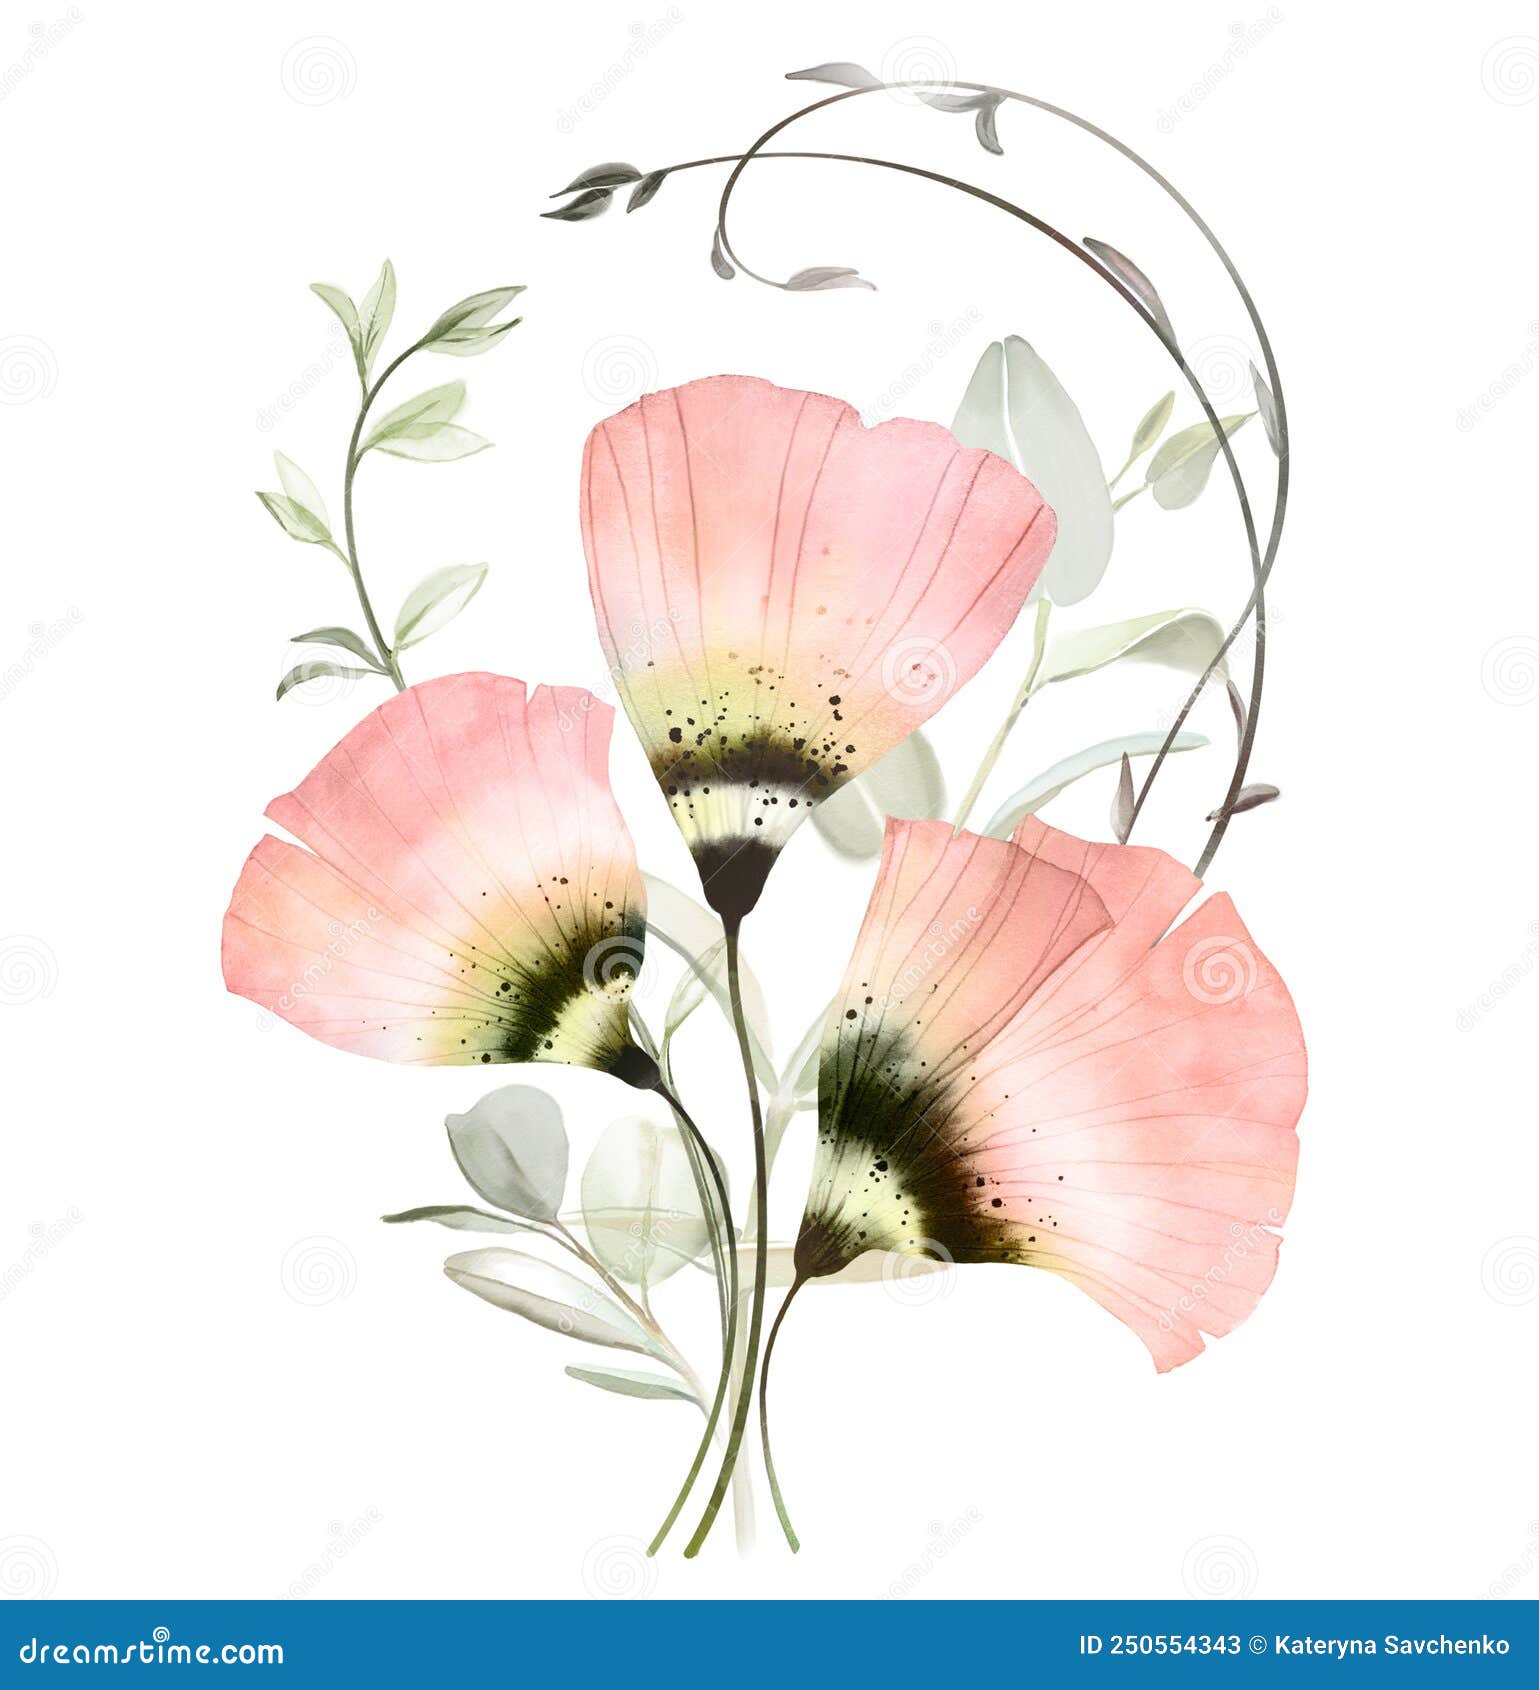 Watercolor Floral Composition. Pastel Color Abstract Poppies with ...